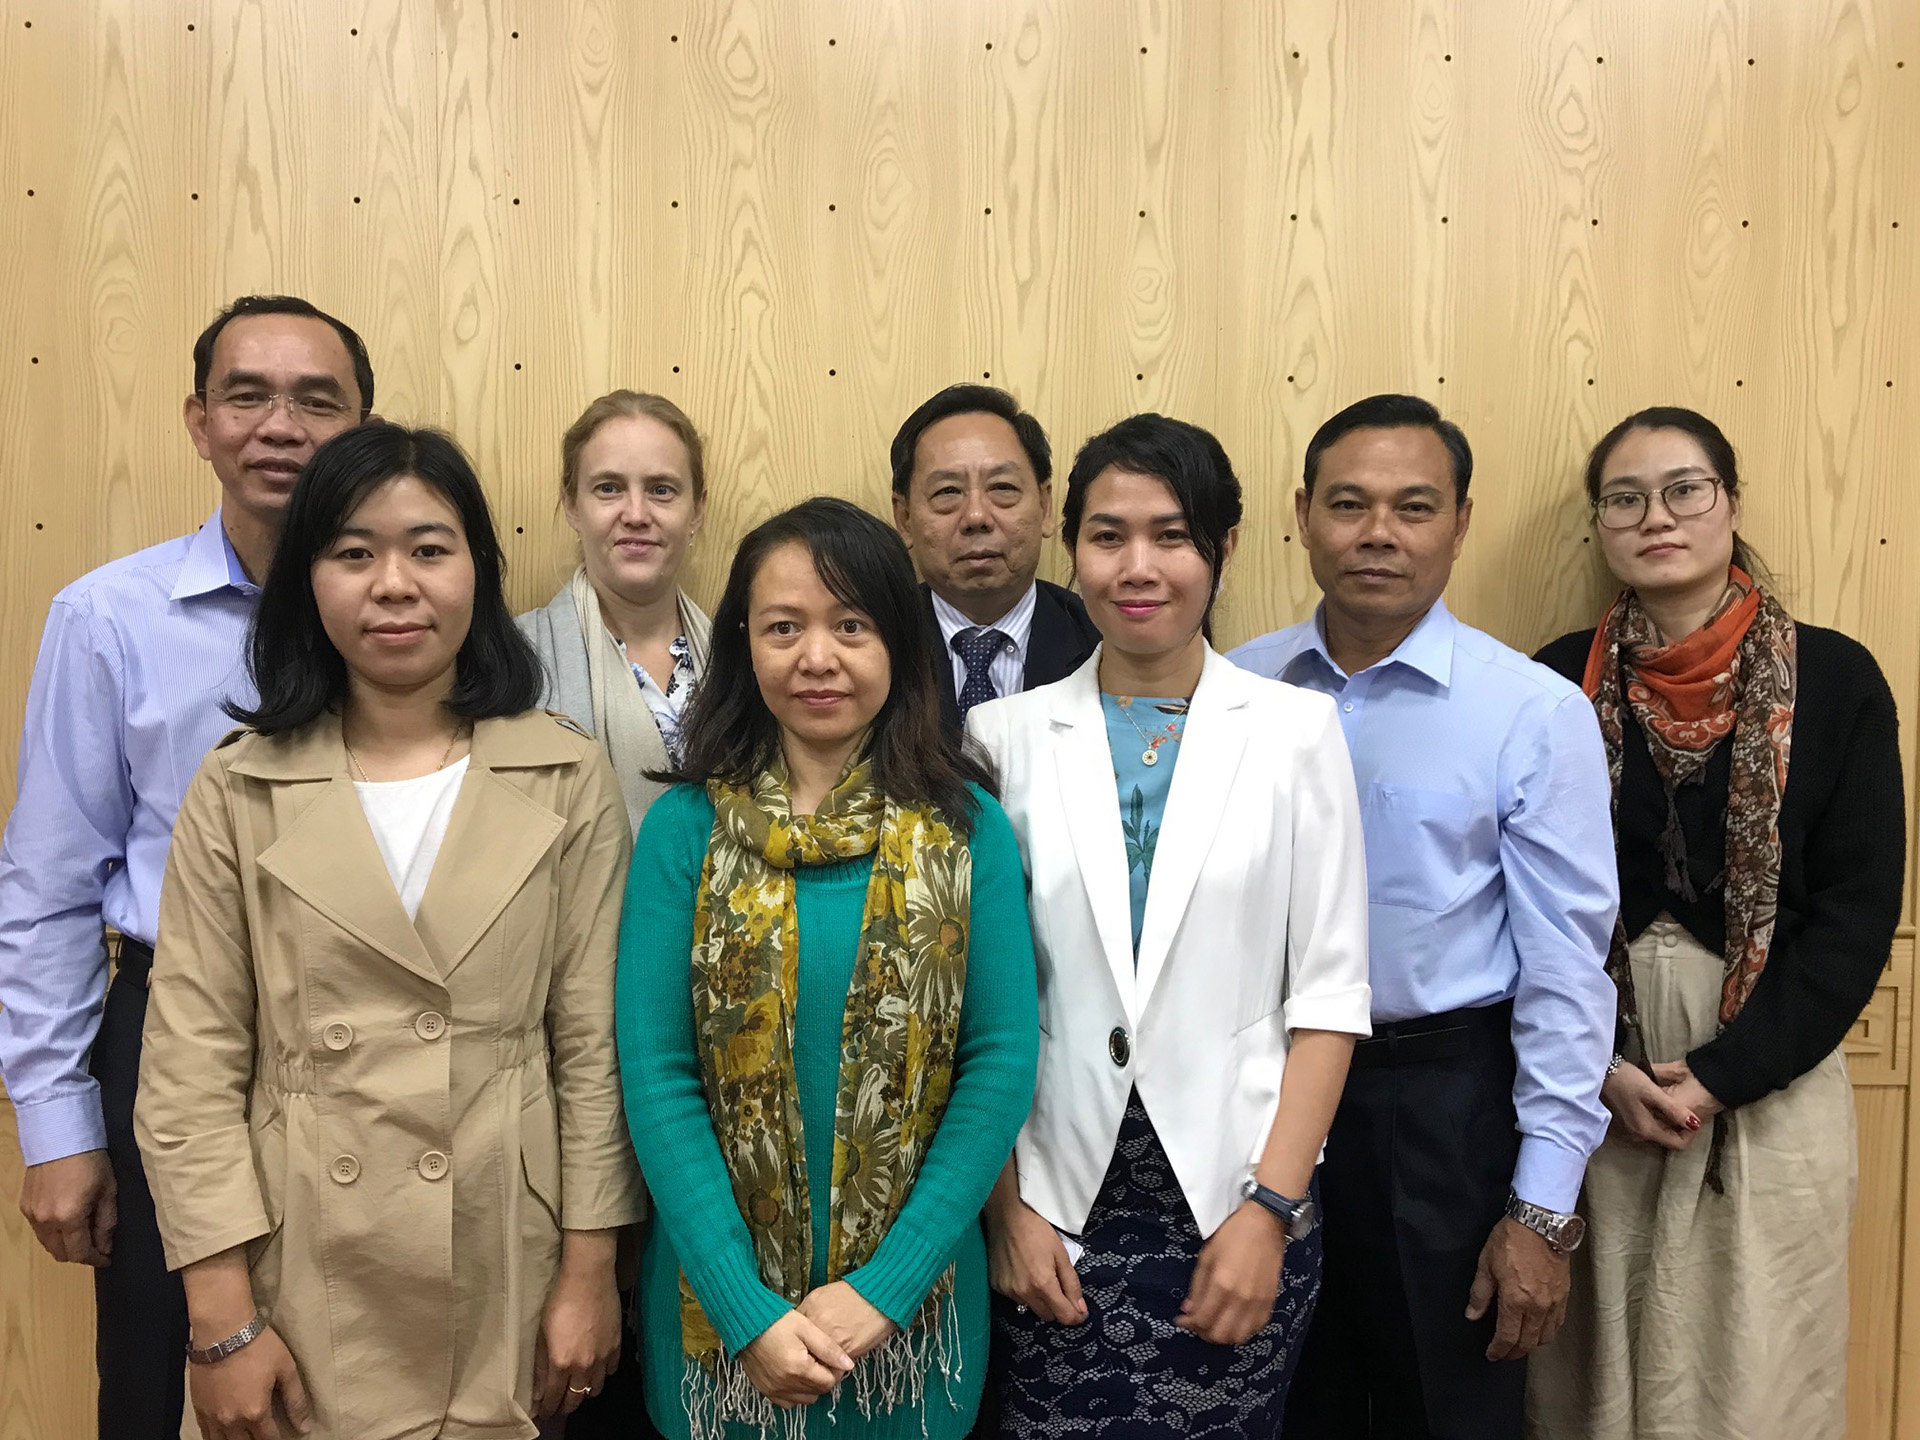 Participants from the &quot;Sub-regional Exchange on Operationalizing SIS&quot; in Hanoi, Viet Nam in December 2019